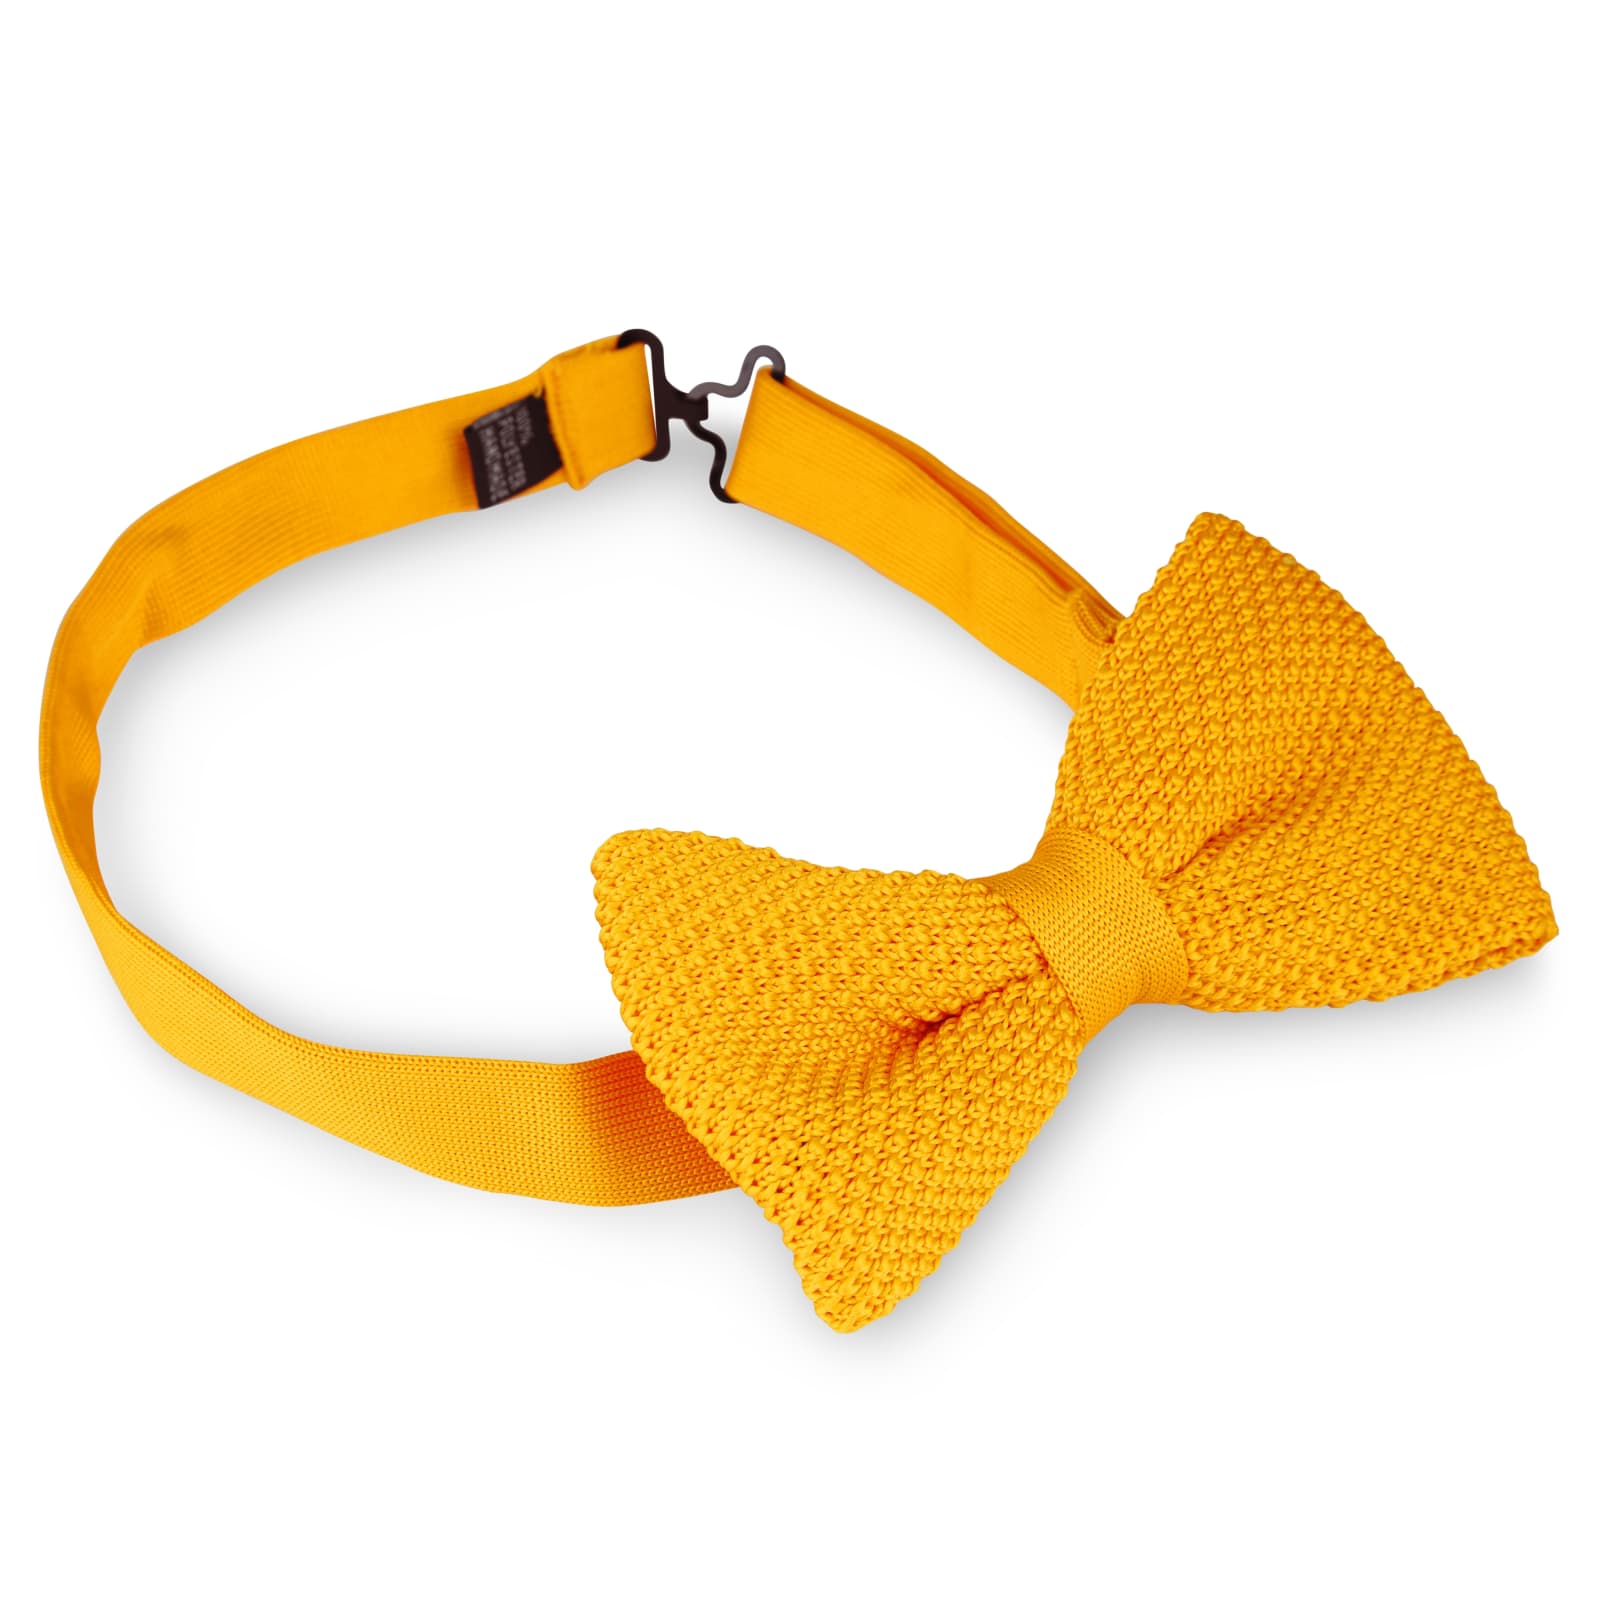 YELLOW KNITTED BOW TIES